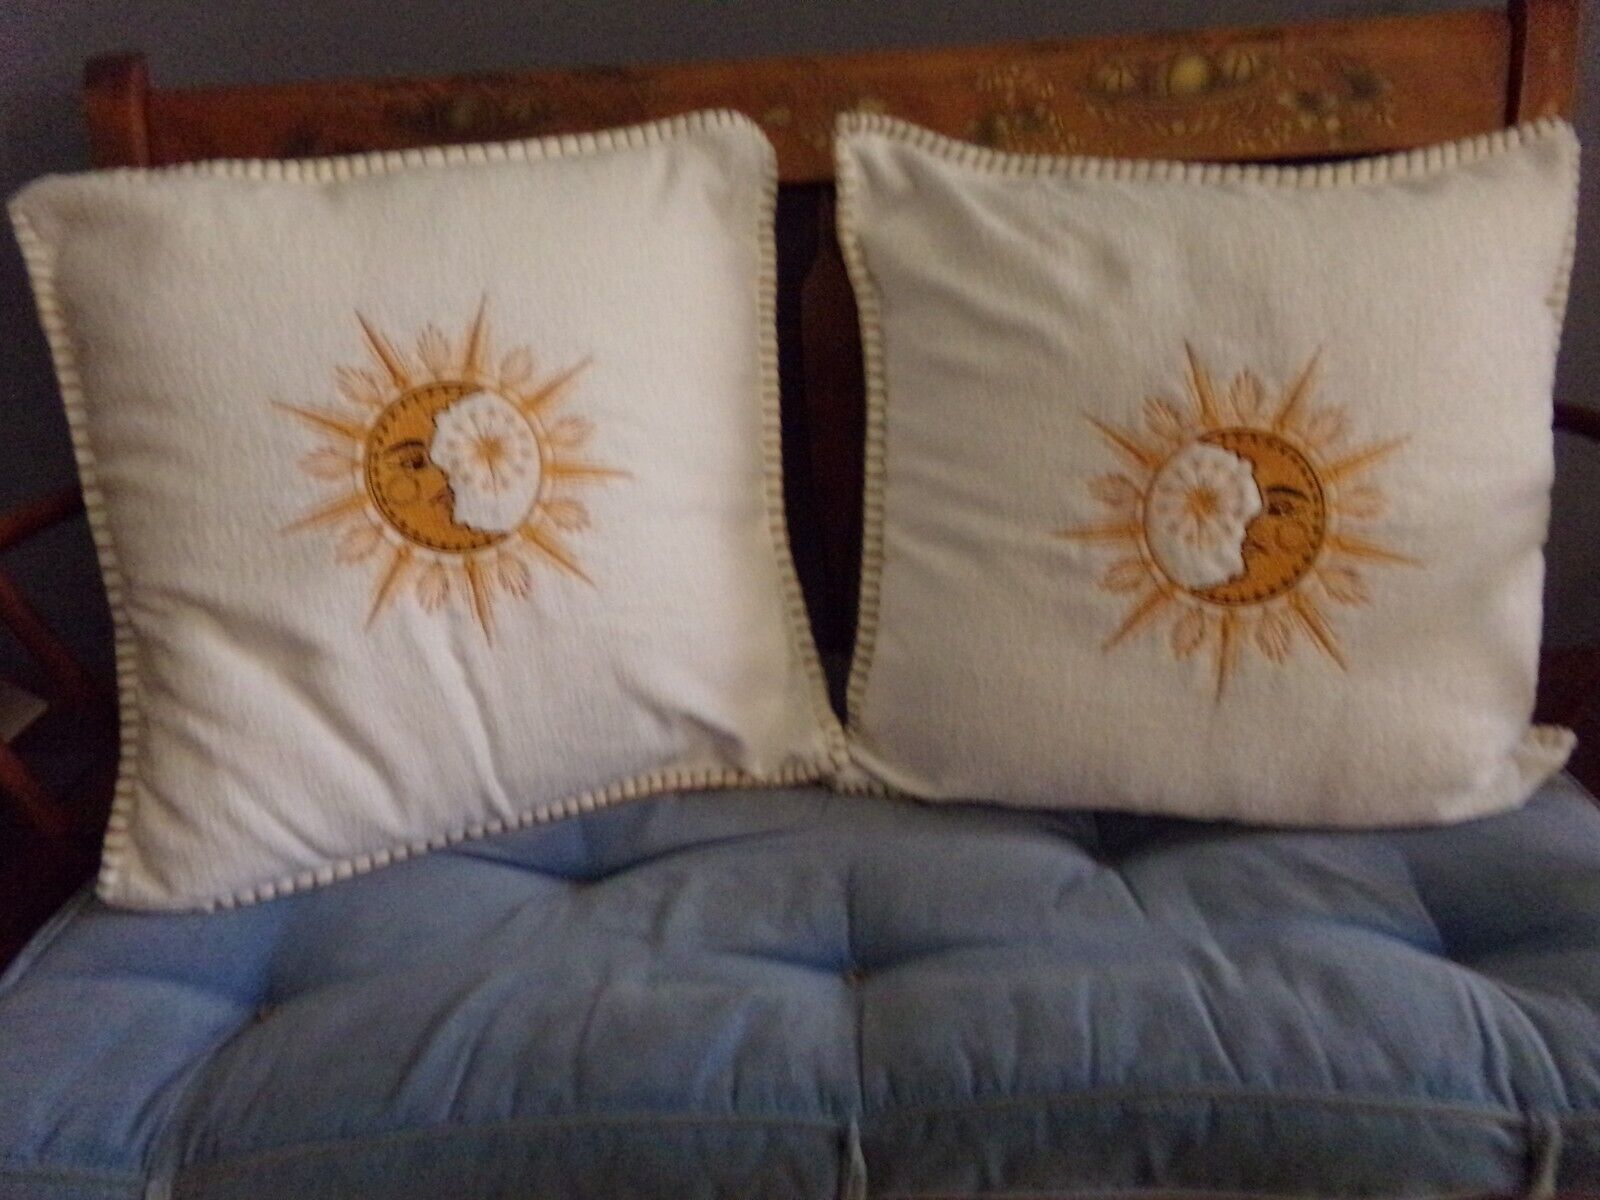 Embroidered Mystic Moon pillow cases